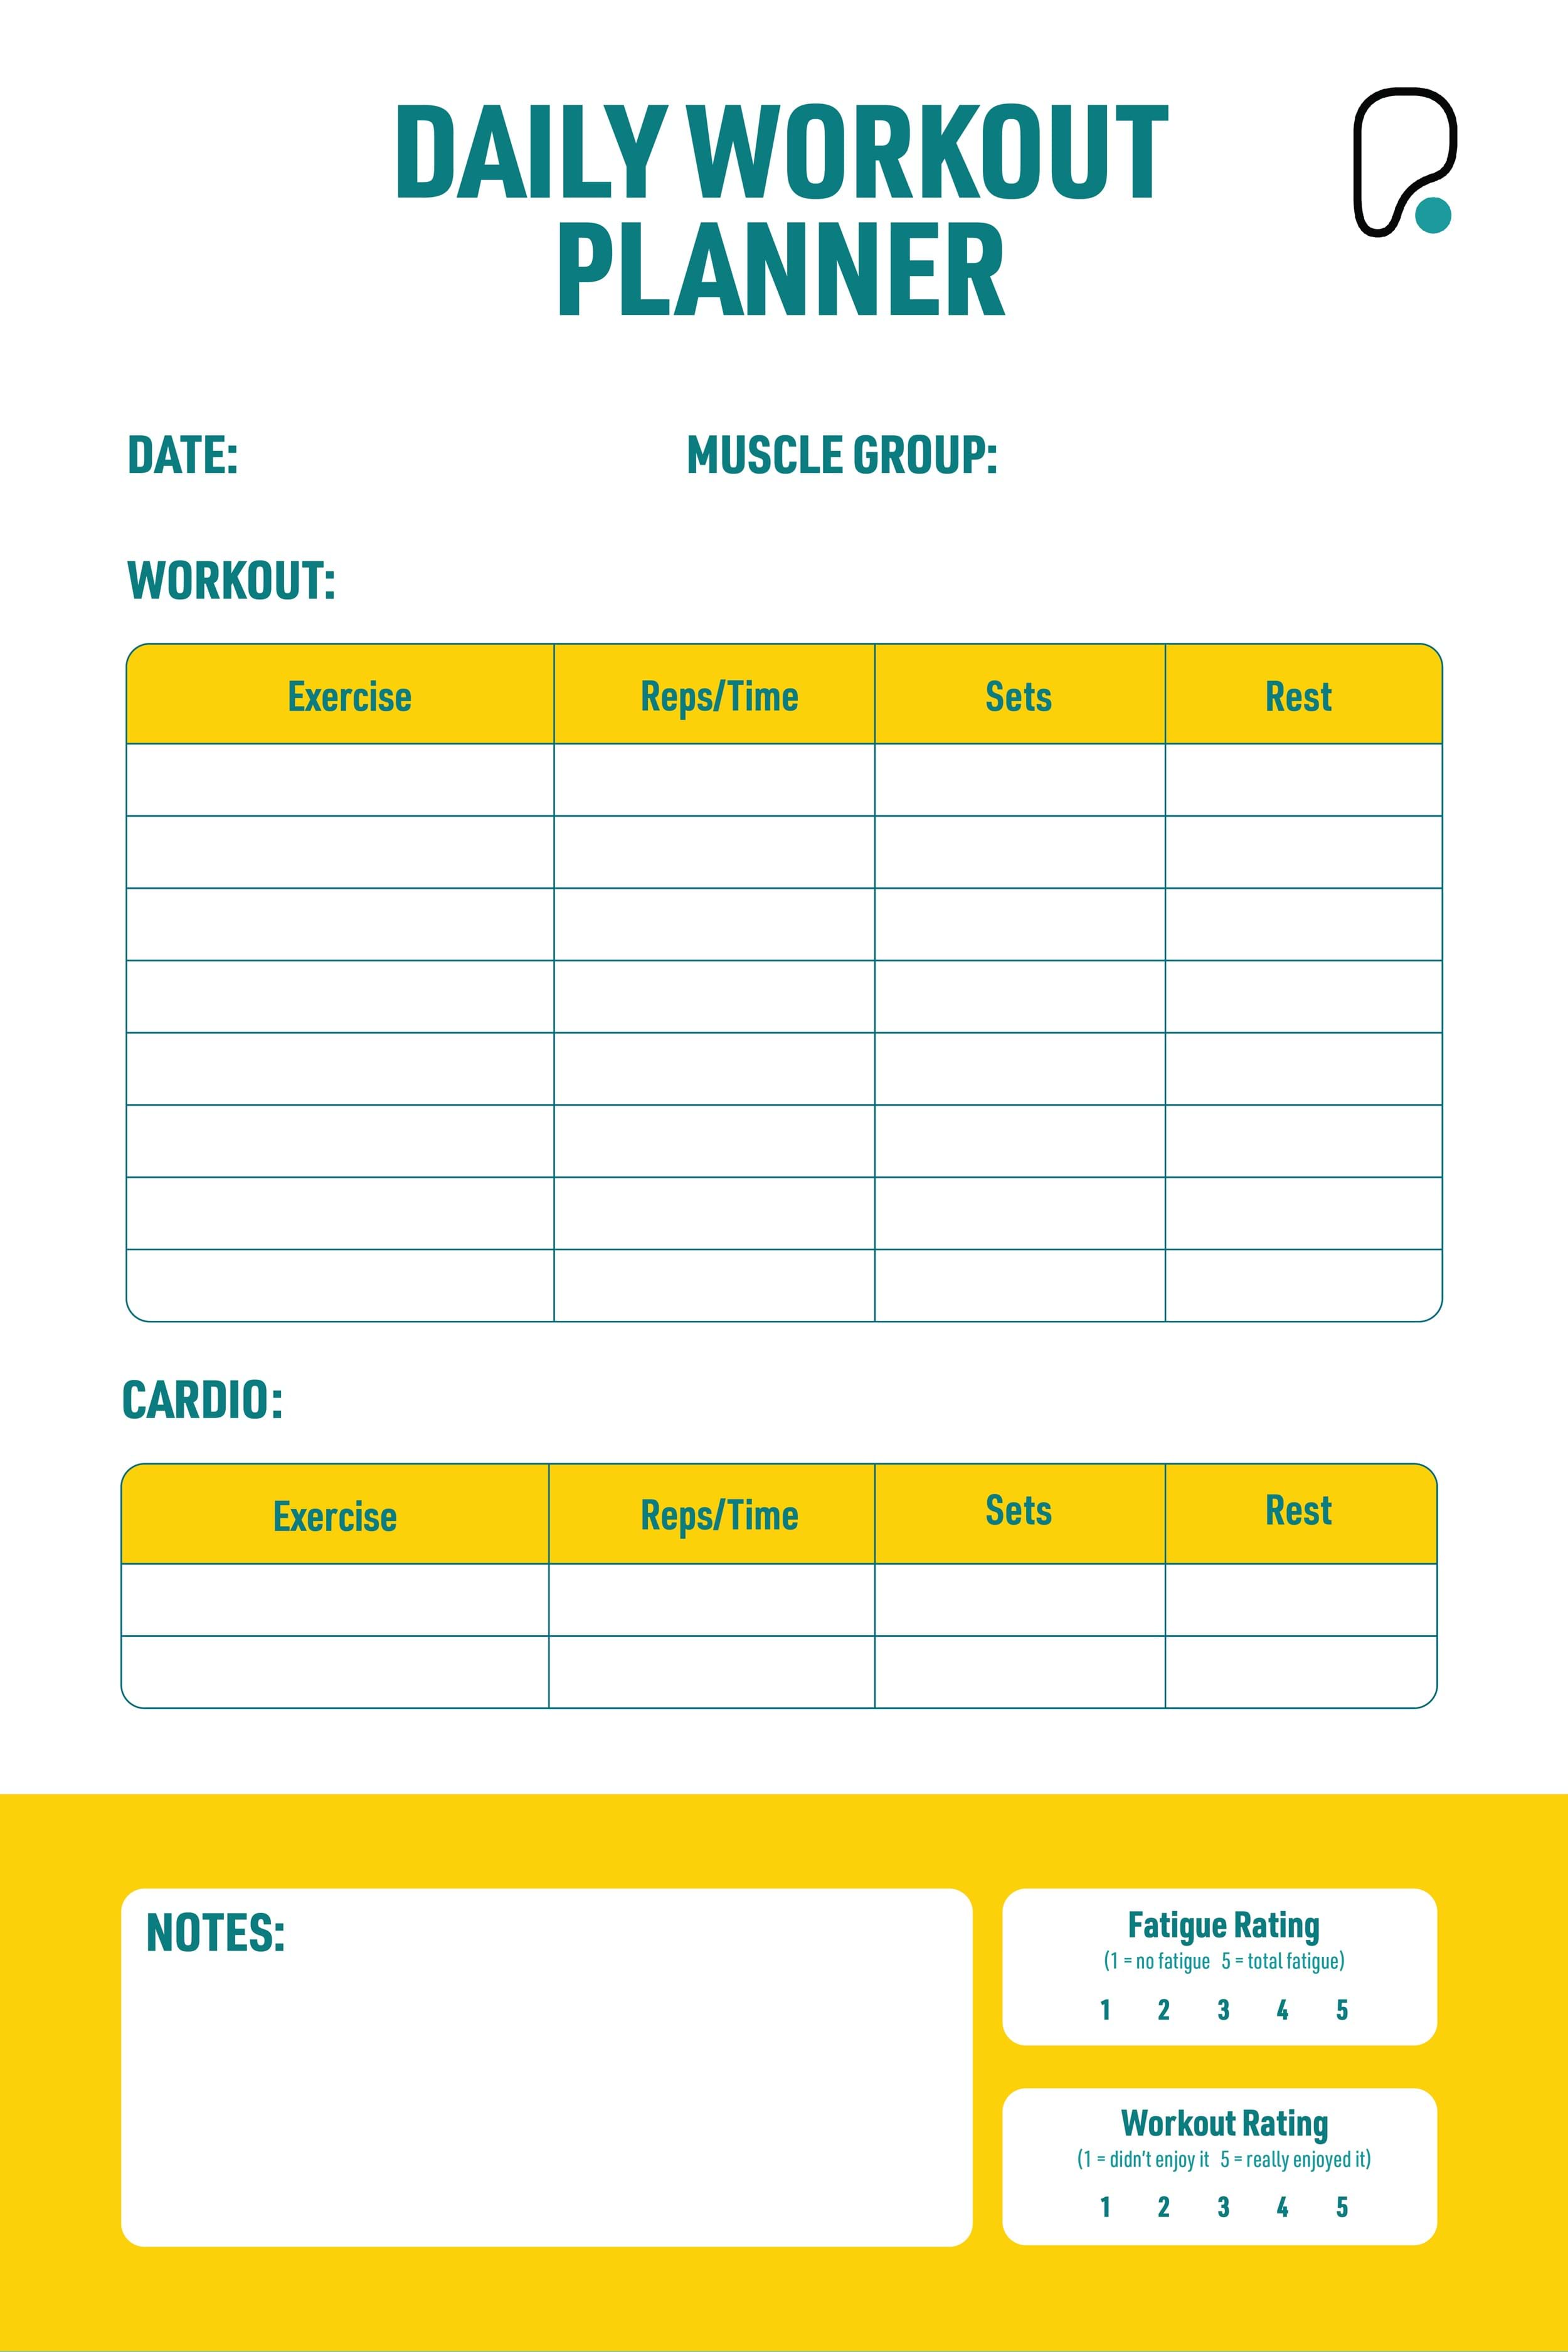 Workout Plan Templates: Download Or Make Yourself | PureGym | How to ...